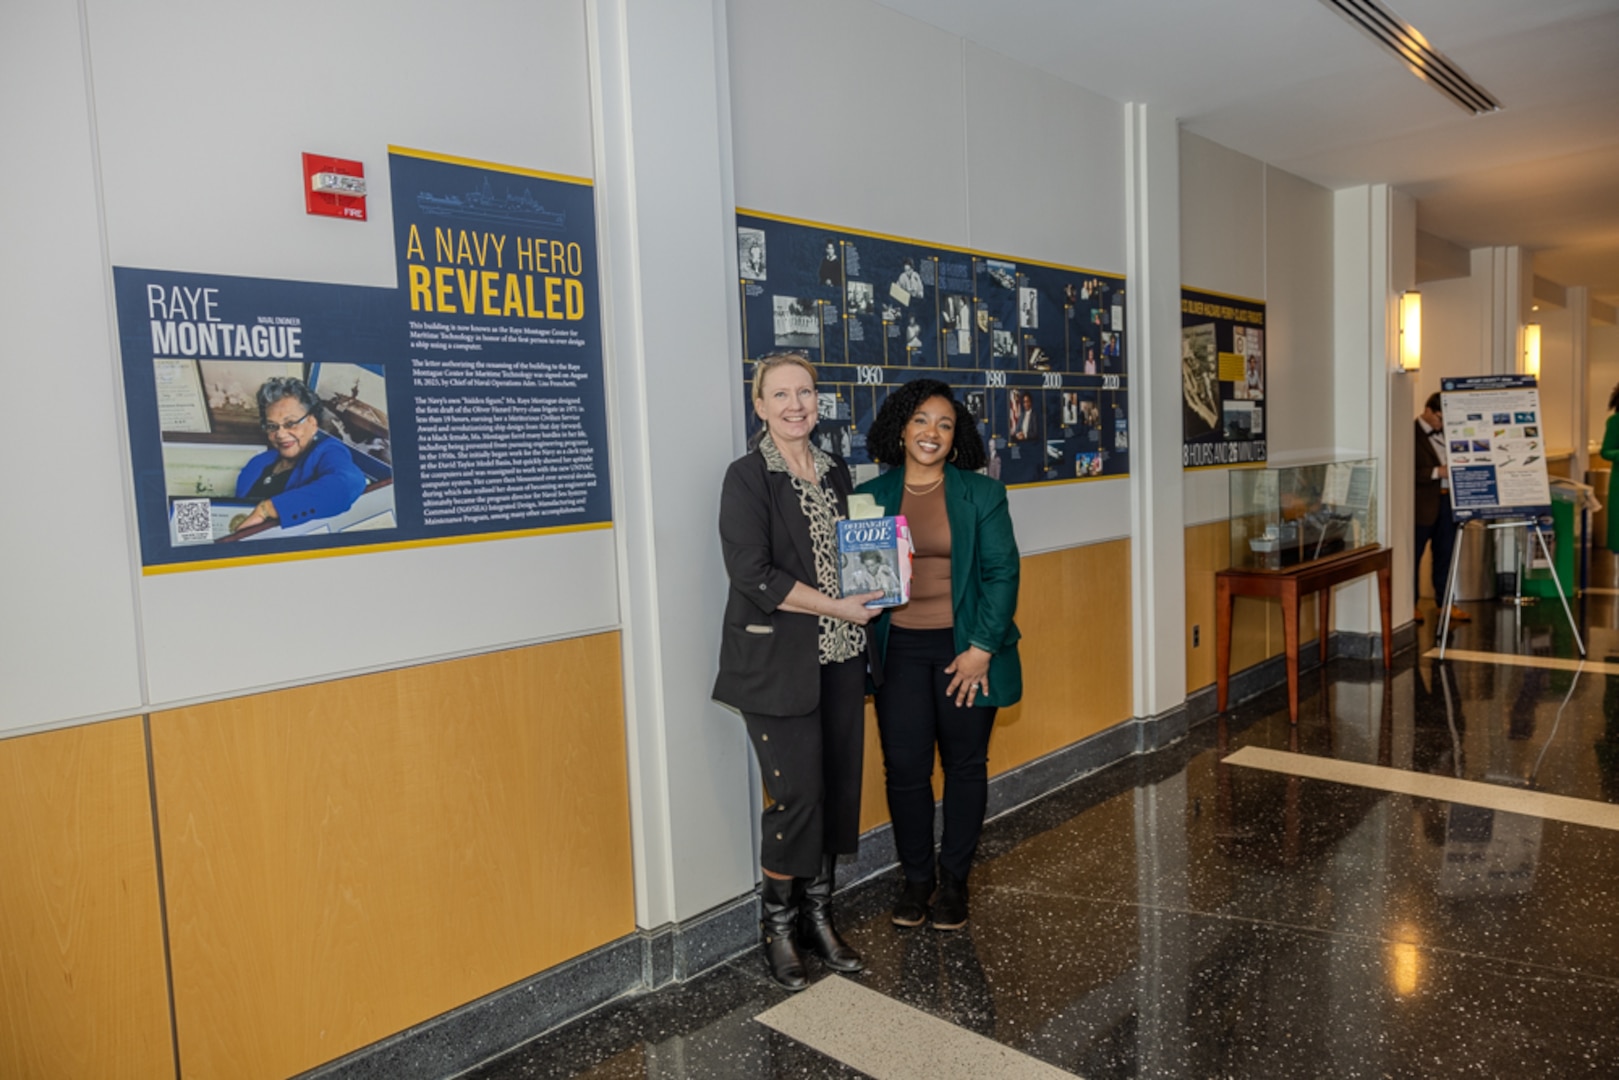 Director for Corporate Communications Kelley Stirling (left) and Multimedia Specialist Chalene “Lena” Simmons (right) stand next to a timeline highlighting the career of Navy “hidden figure” Raye Montague.